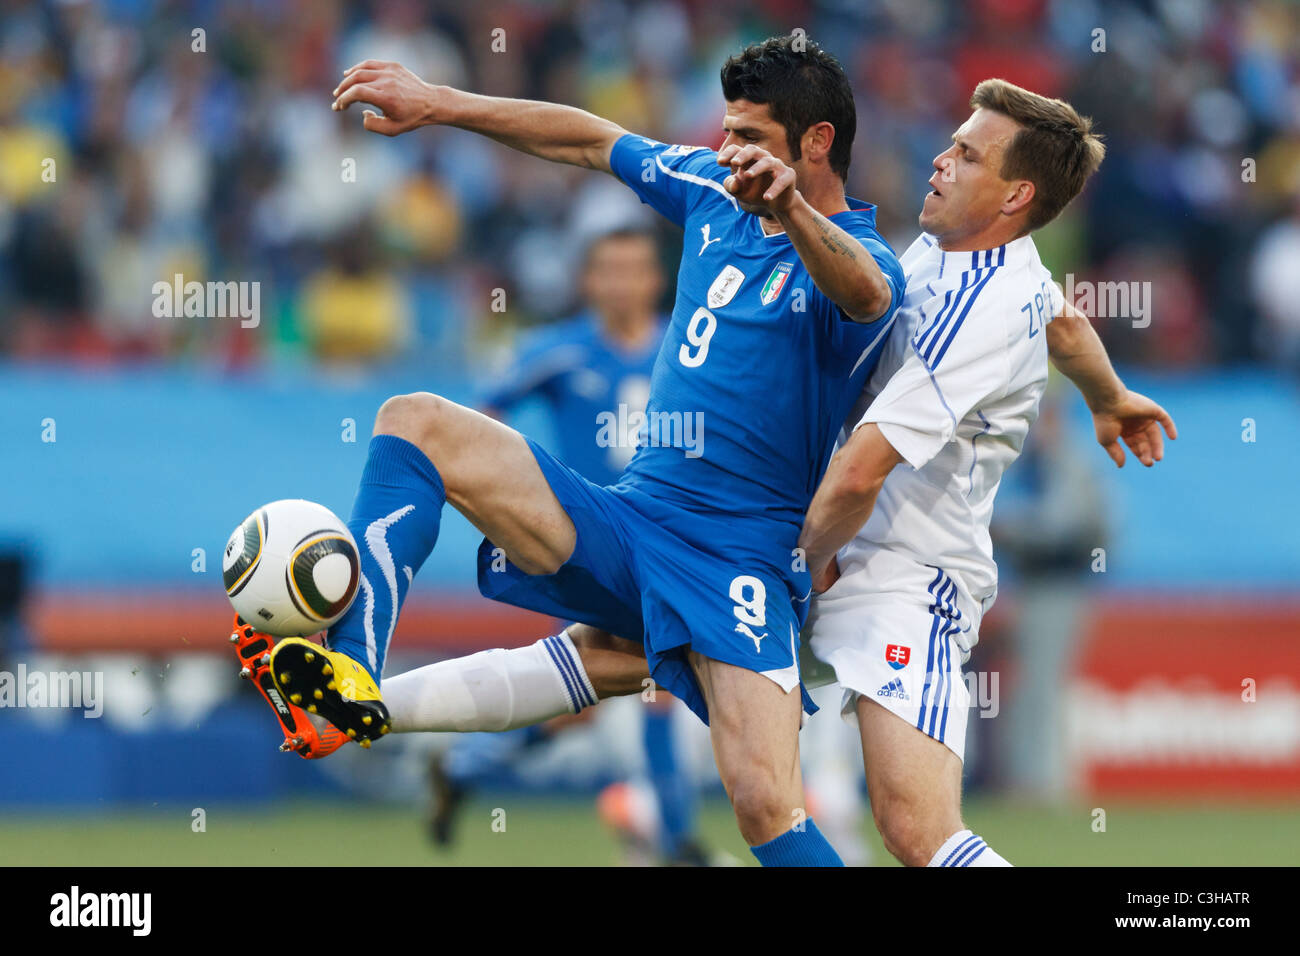 Radoslav Zabavnik of Slovakia (r) defends against Vincenzo Iaquinta of Italy (l) during a 2010 FIFA World Cup soccer match. Stock Photo